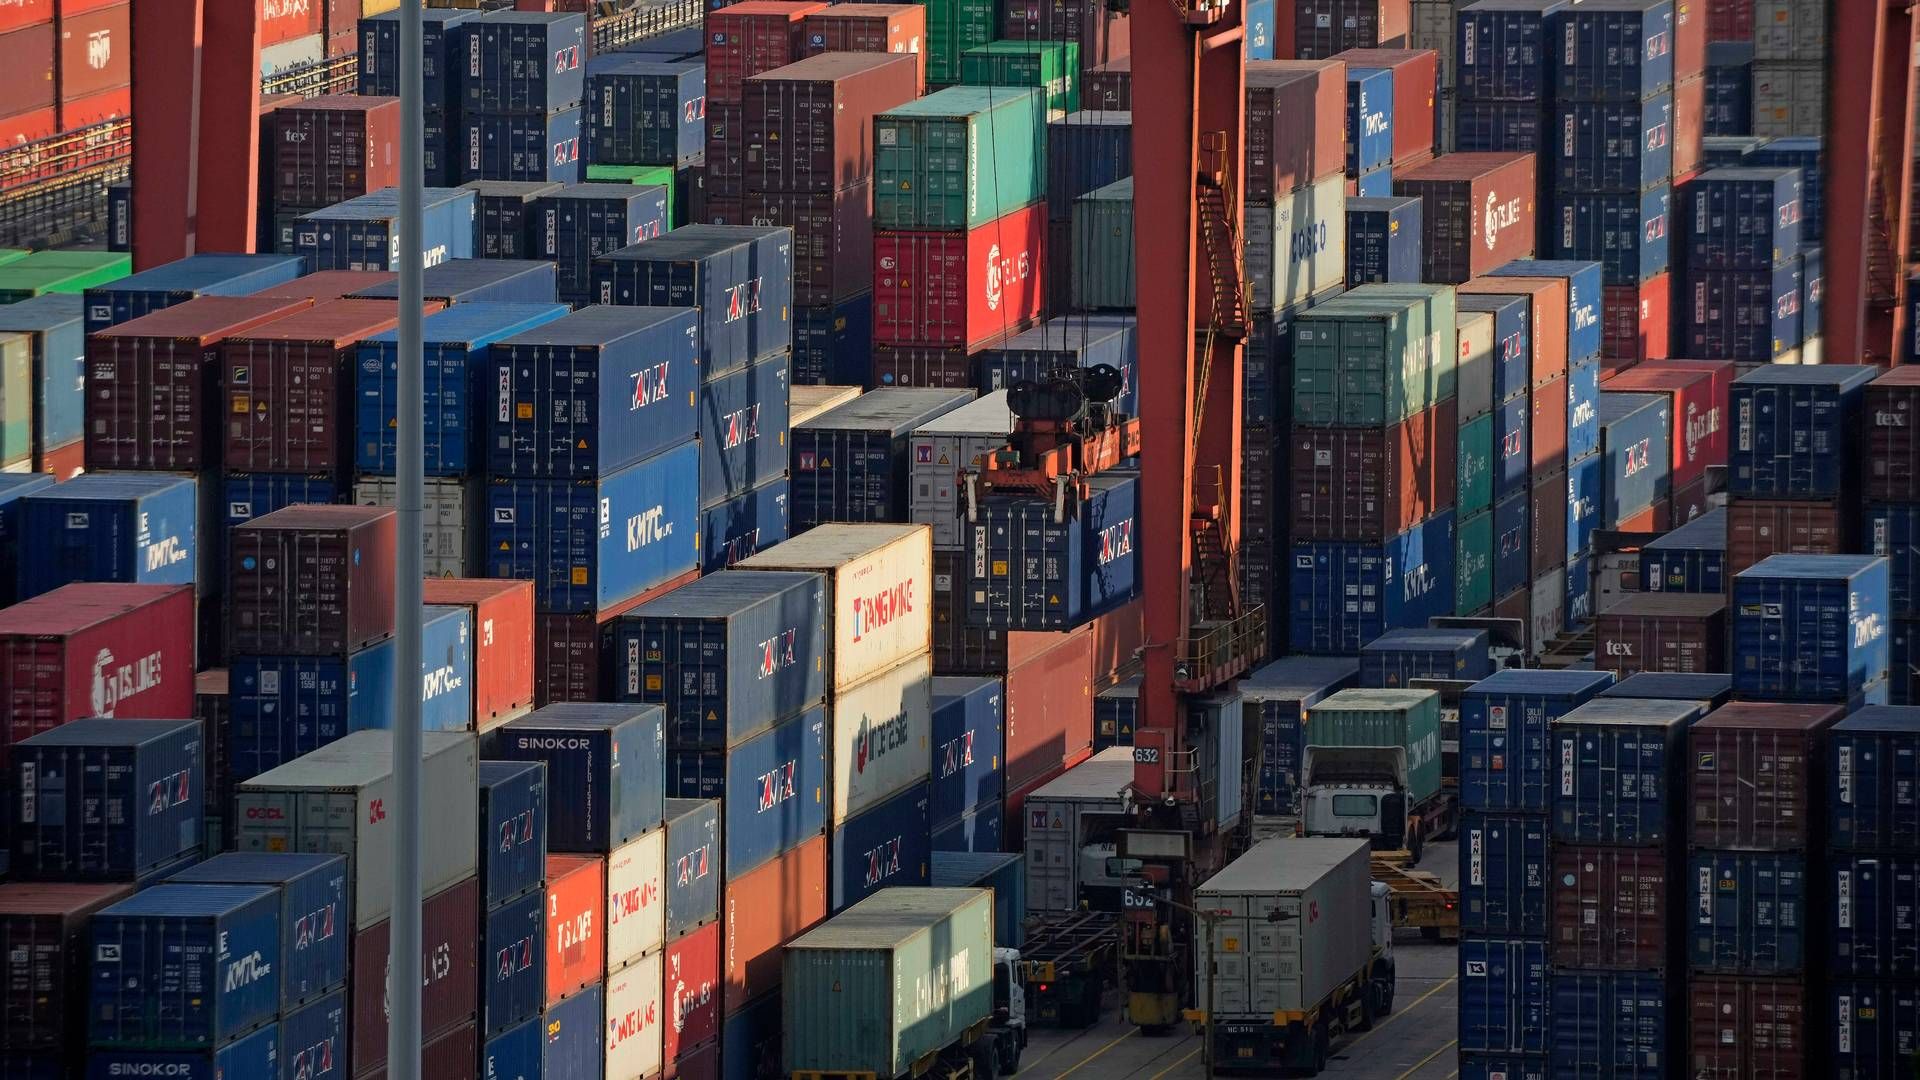 Shipping containers are seen at a port of Kwai Tsing Container Terminals in Hong Kong, Friday, Nov. 5, 2021. | Photo: Kin Cheung/AP/Ritzau Scanpix